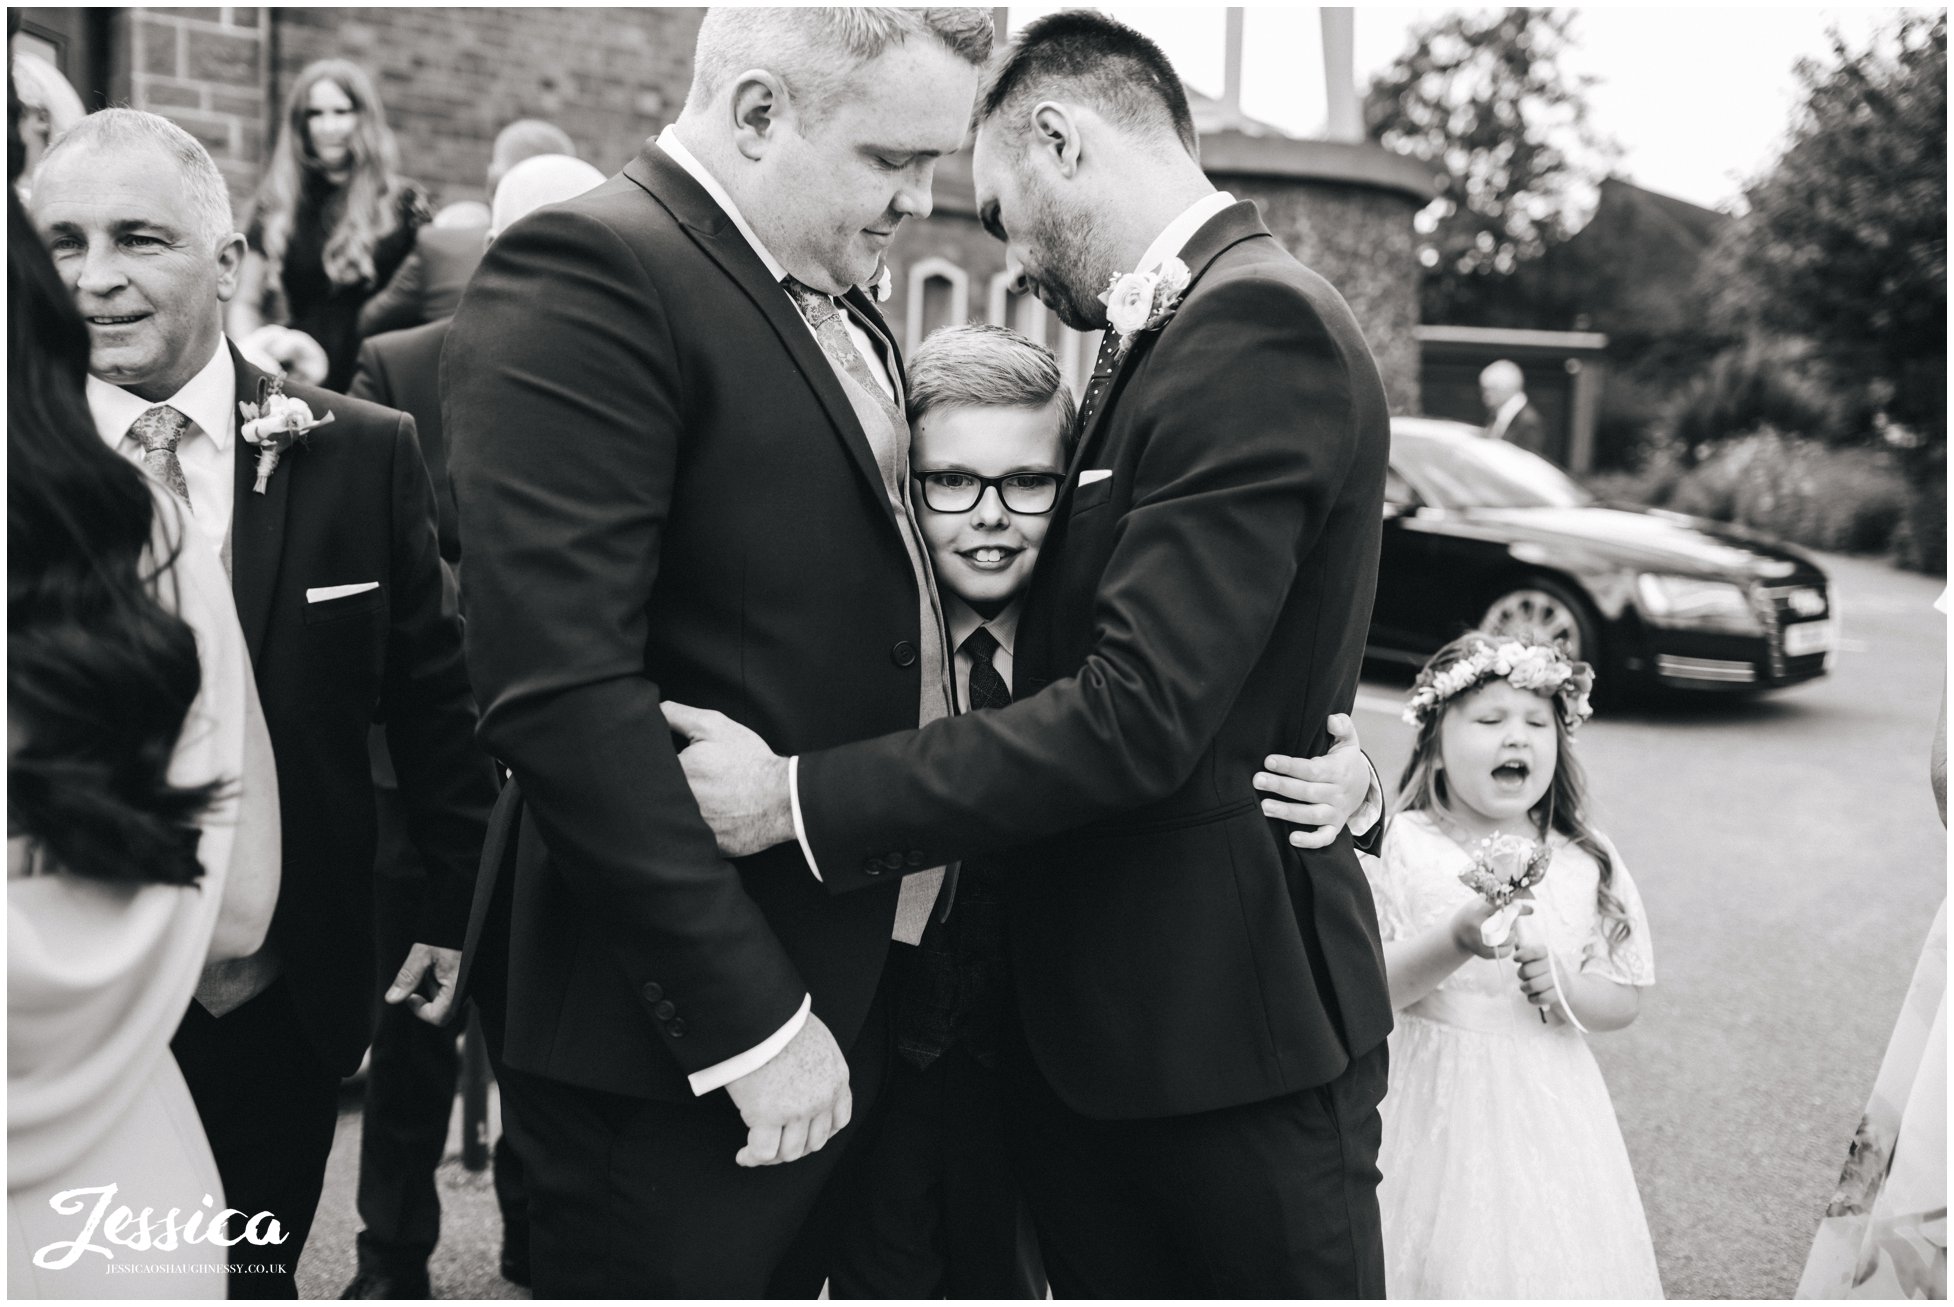 guests hug page boy after the wedding ceremony at Holy rosary church